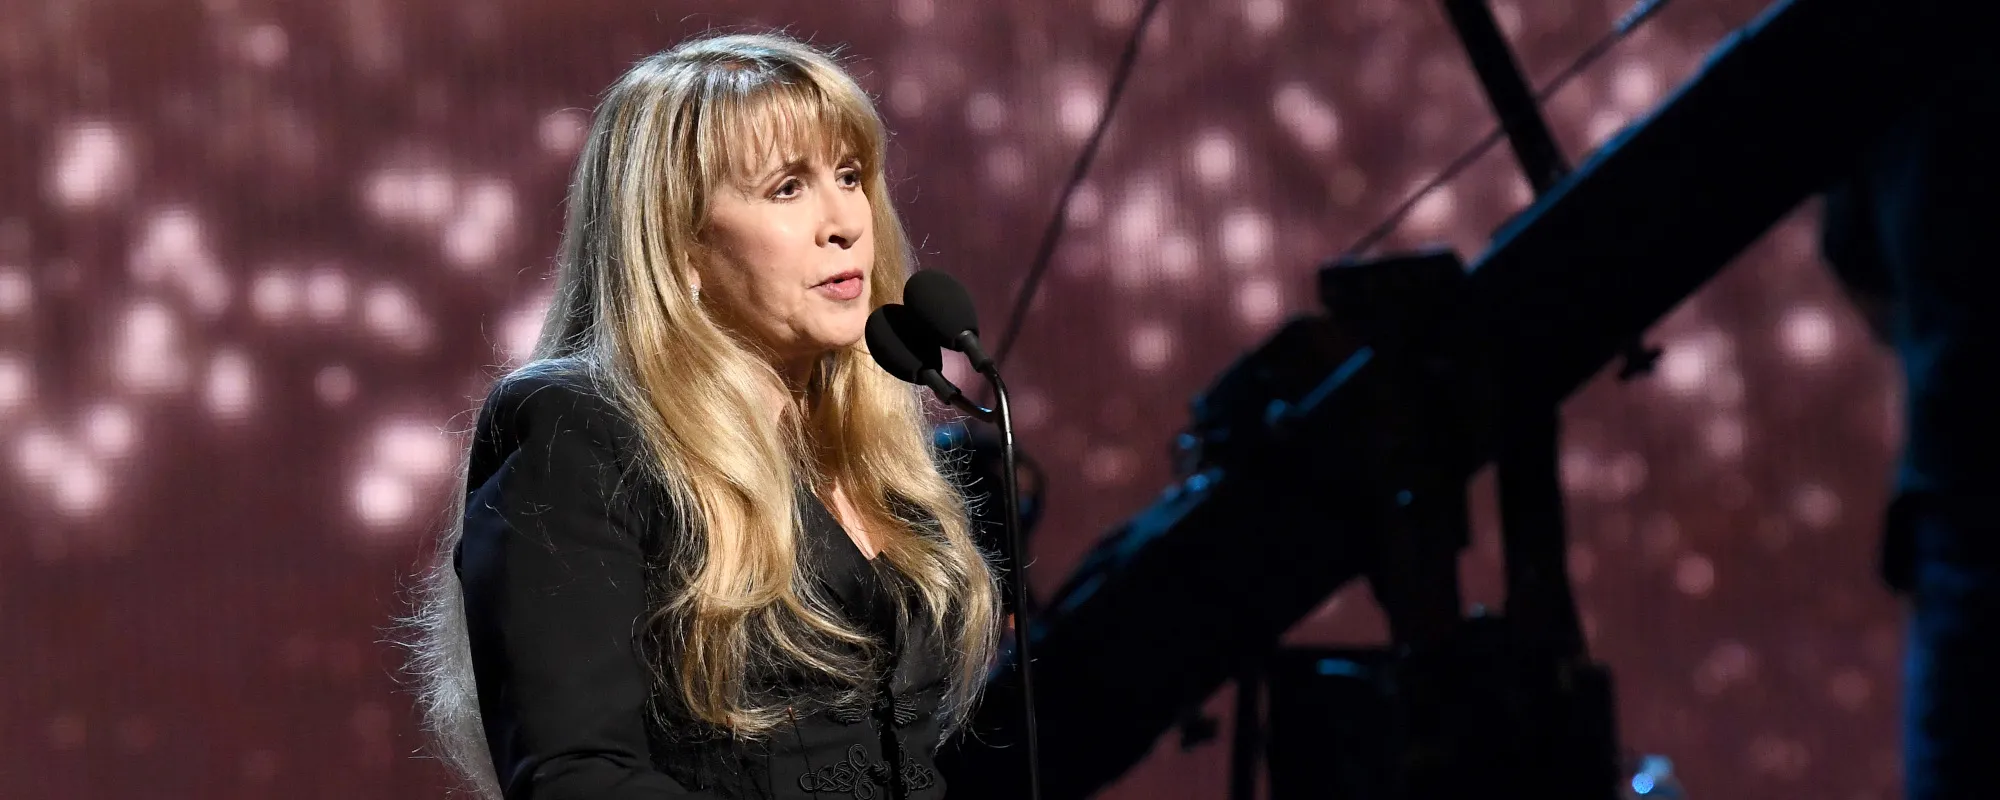 5 of Stevie Nicks’ Most Enchanting Moments with Fleetwood Mac